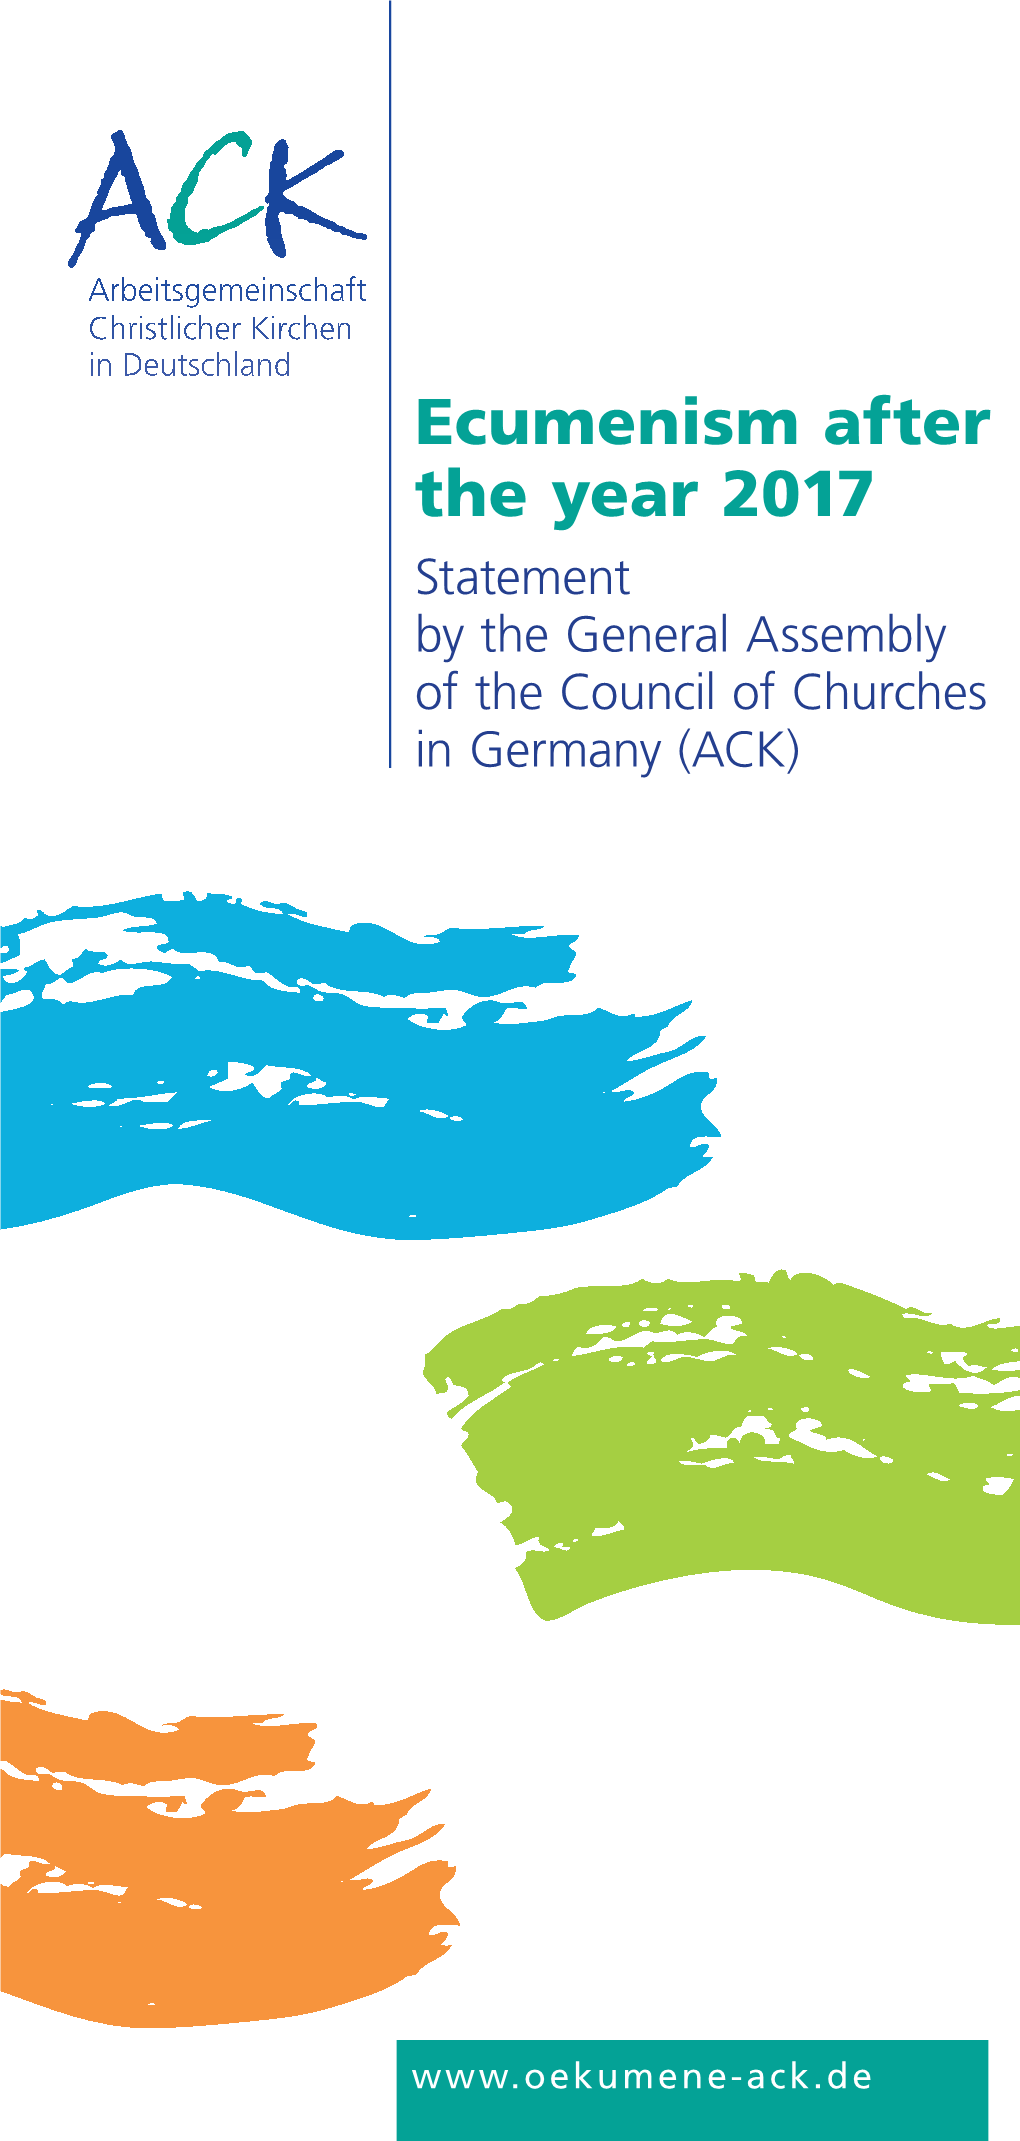 Ecumenism After the Year 2017 Statement by the General Assembly of the Council of Churches in Germany (ACK)